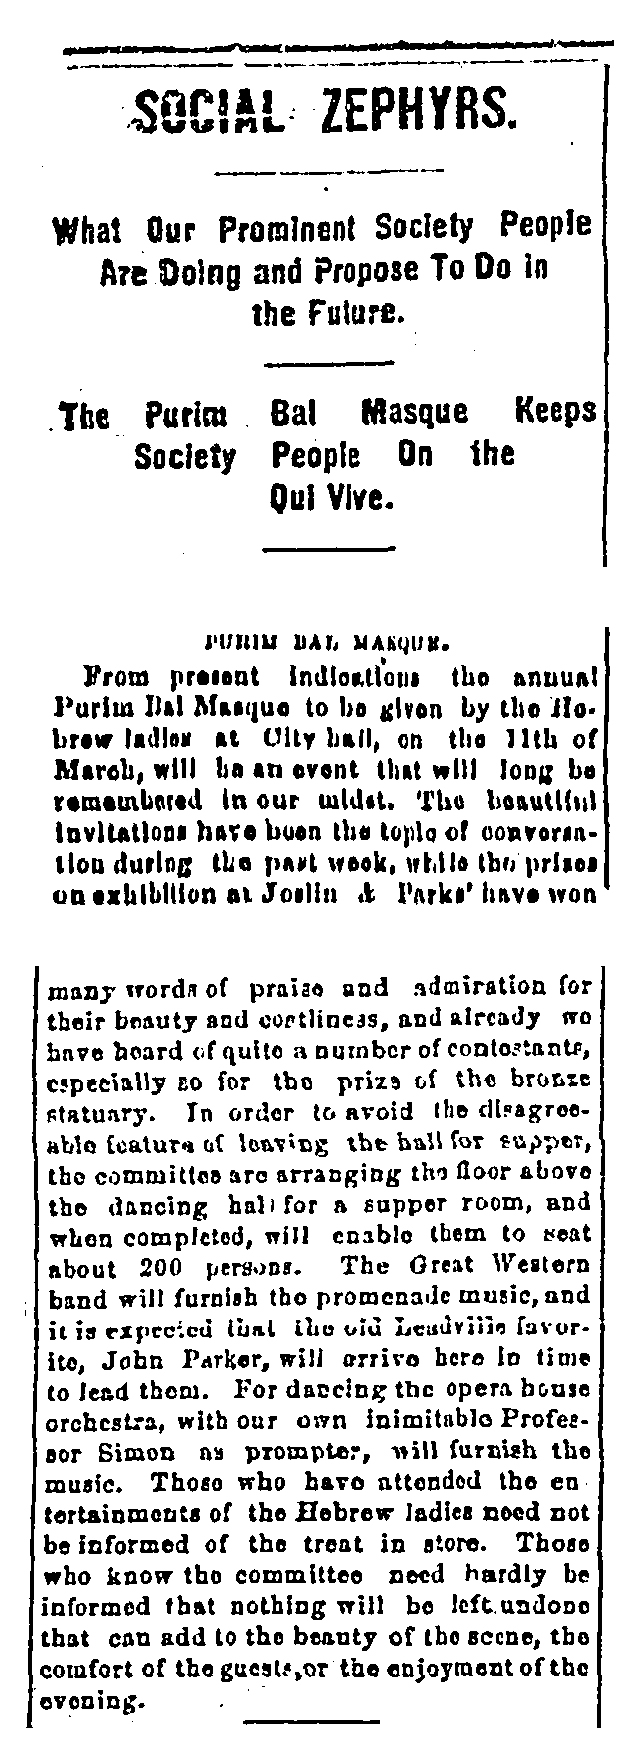 Leadville Daily Herald. Monday, February 24, 1884.